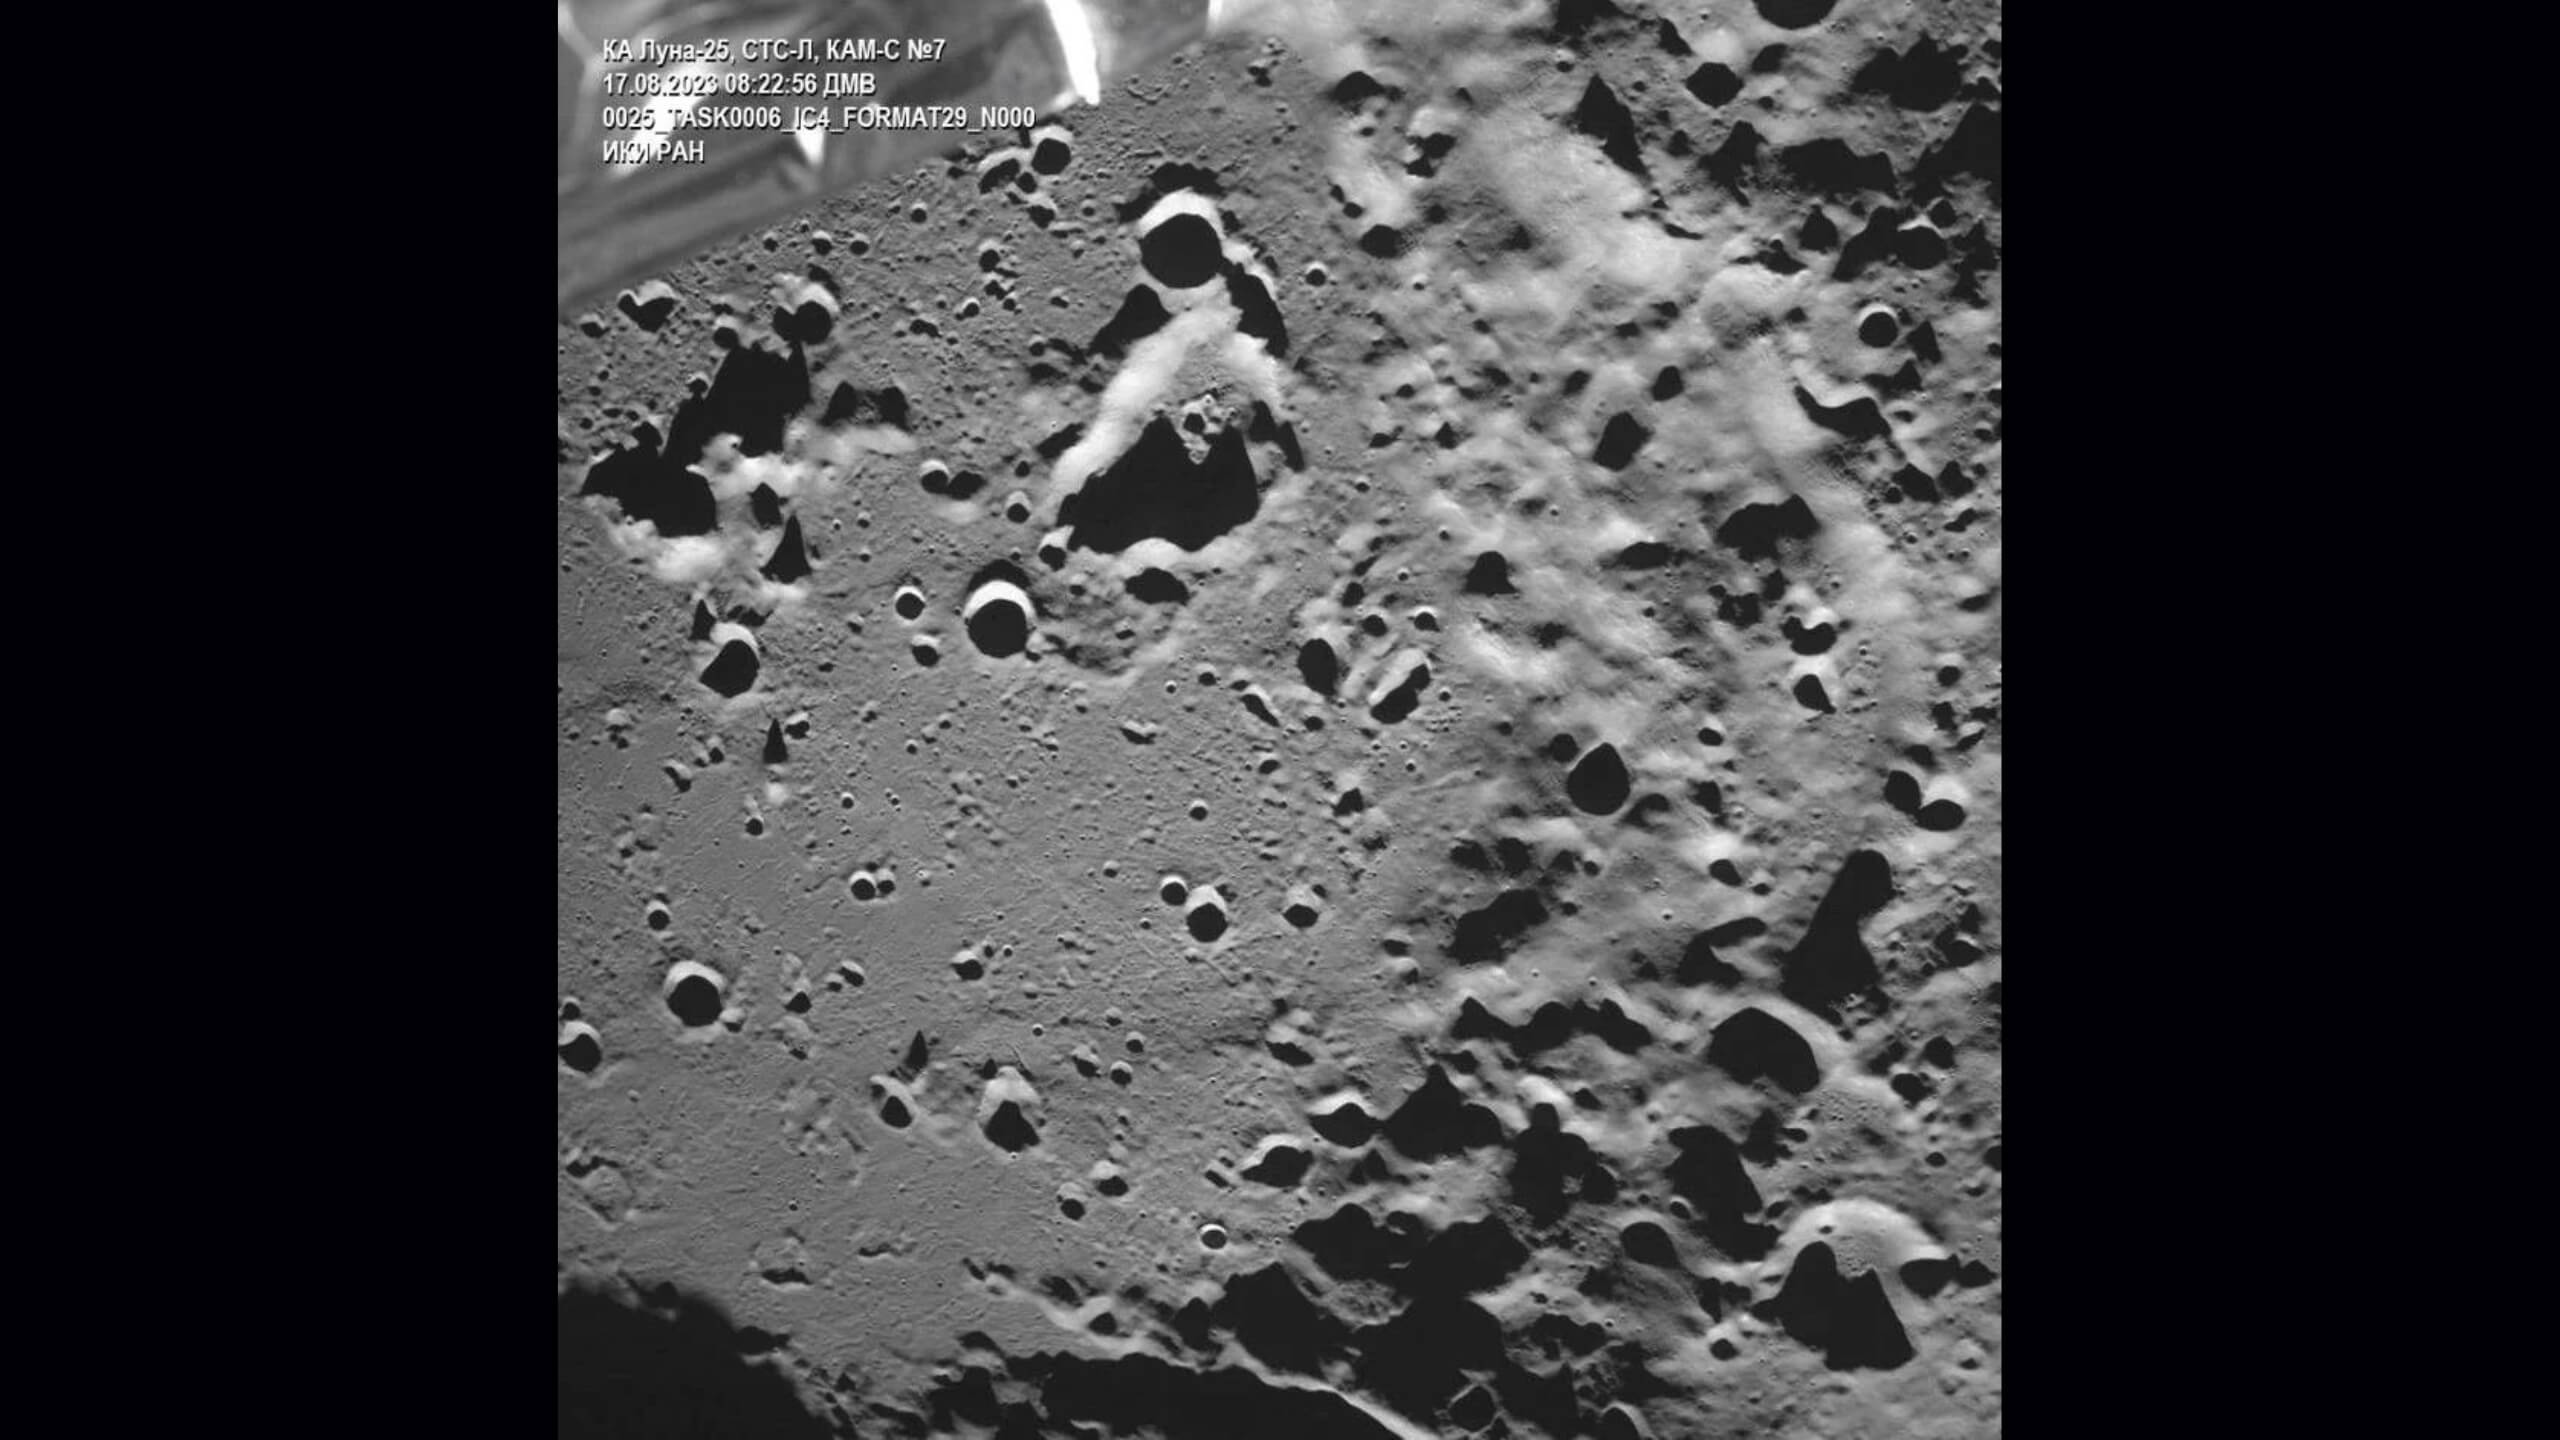 Luna 25 first image of the moon.